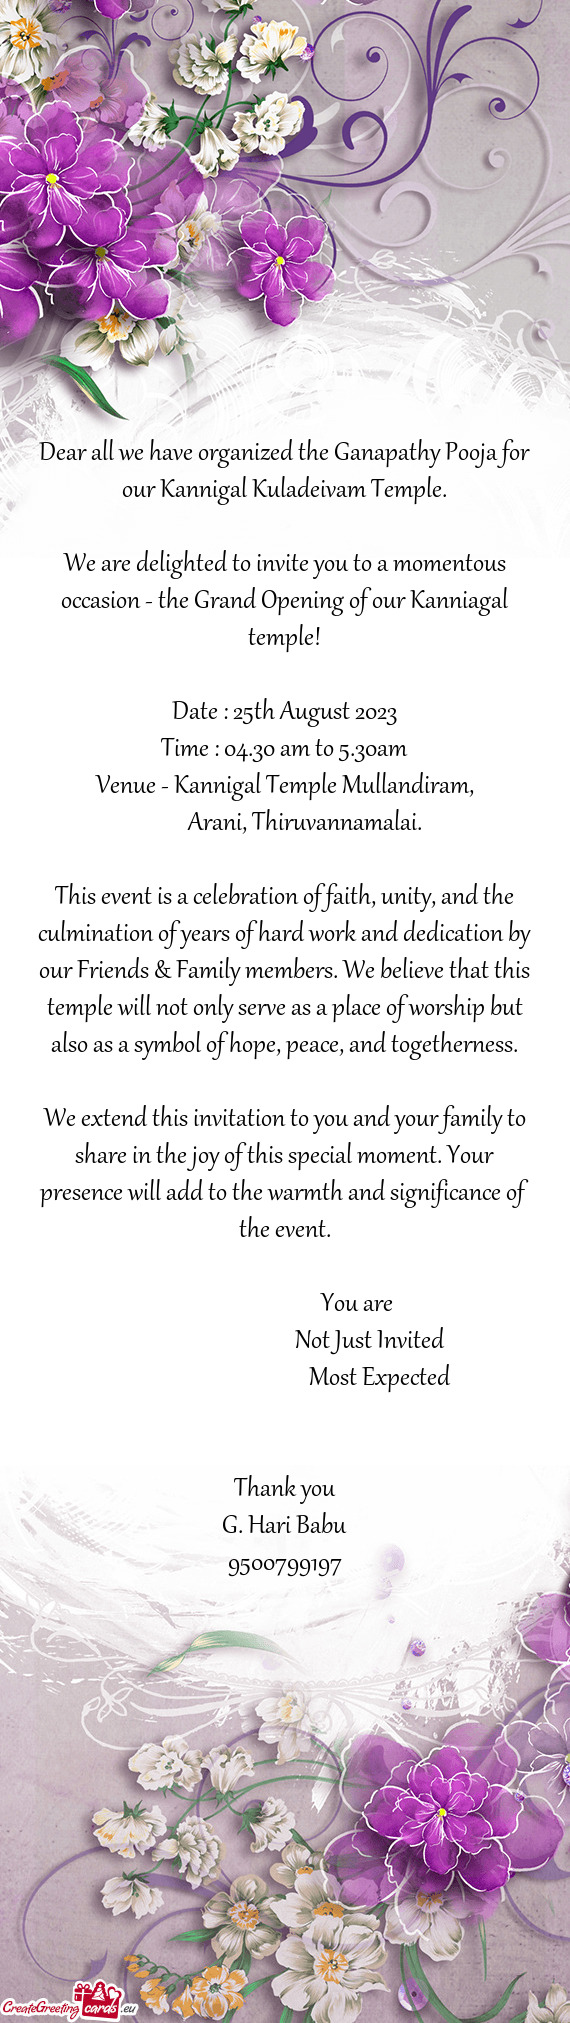 Dear all we have organized the Ganapathy Pooja for our Kannigal Kuladeivam Temple